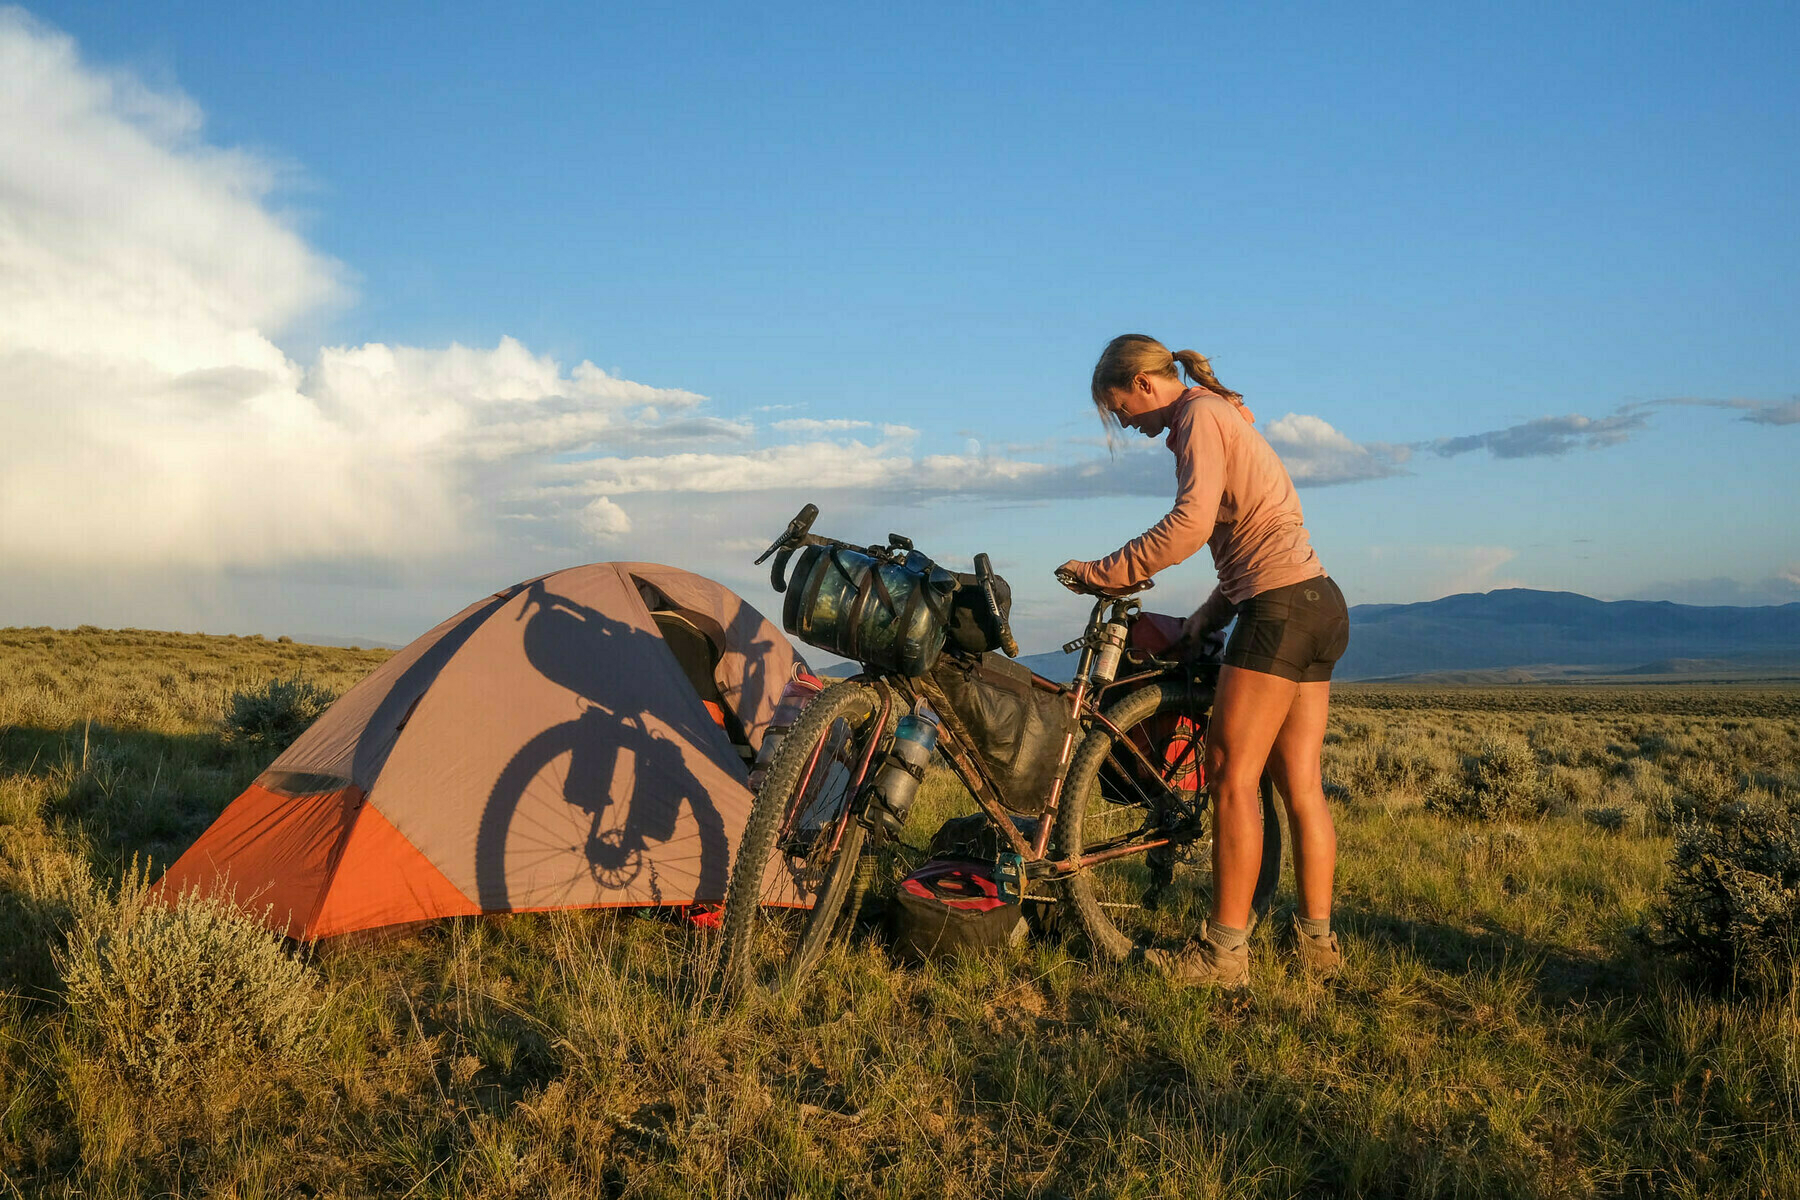 A camper adjusts their gear on a touring bicycle next to a tent with the shadow of another bike on it in an open field at sunset, with distant mountains and a cloudy sky in the background.